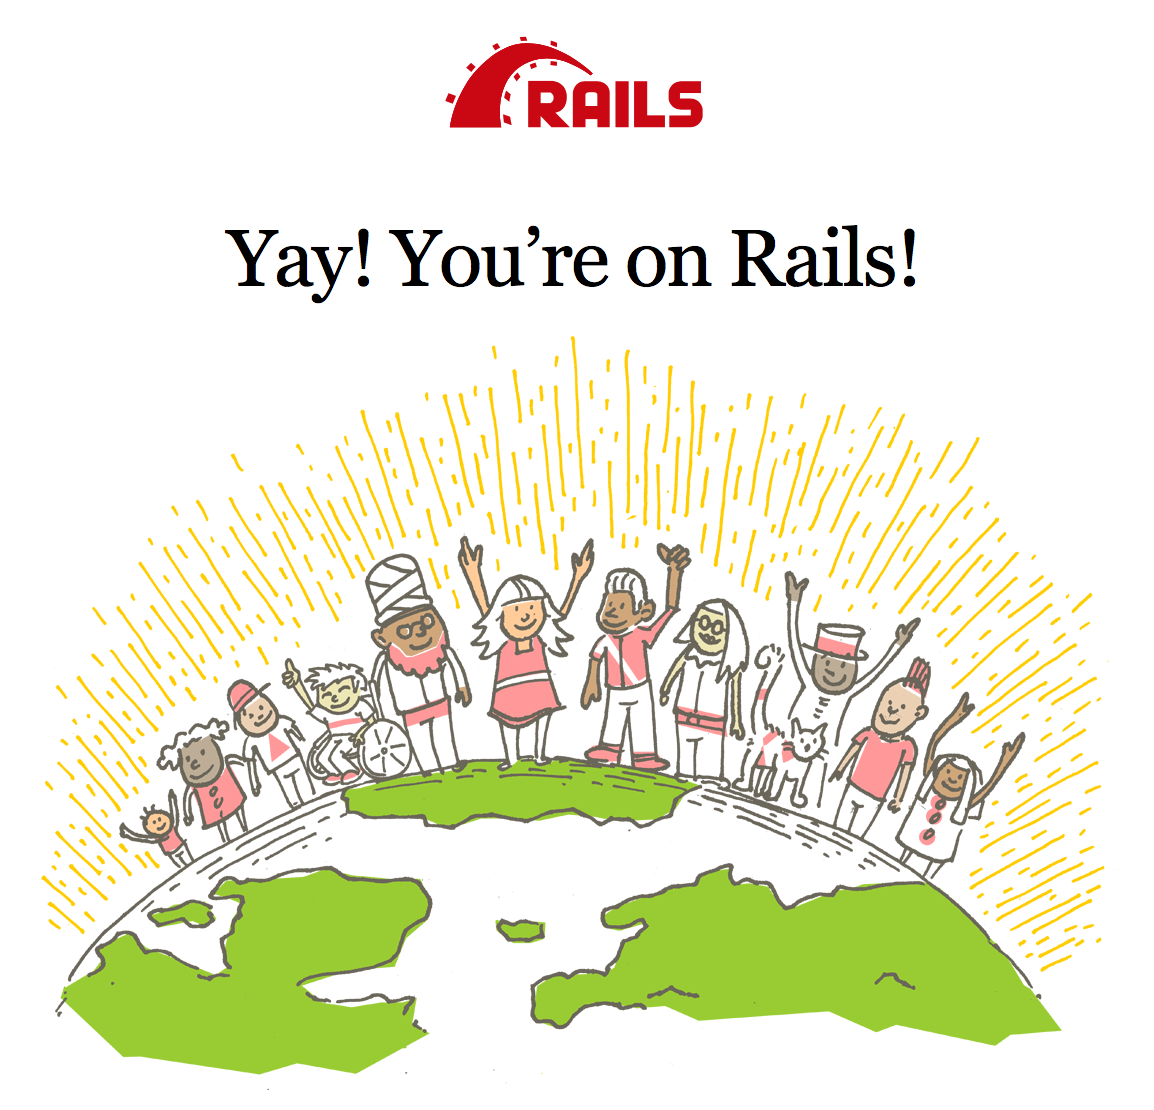 Yay! You're on Rails!